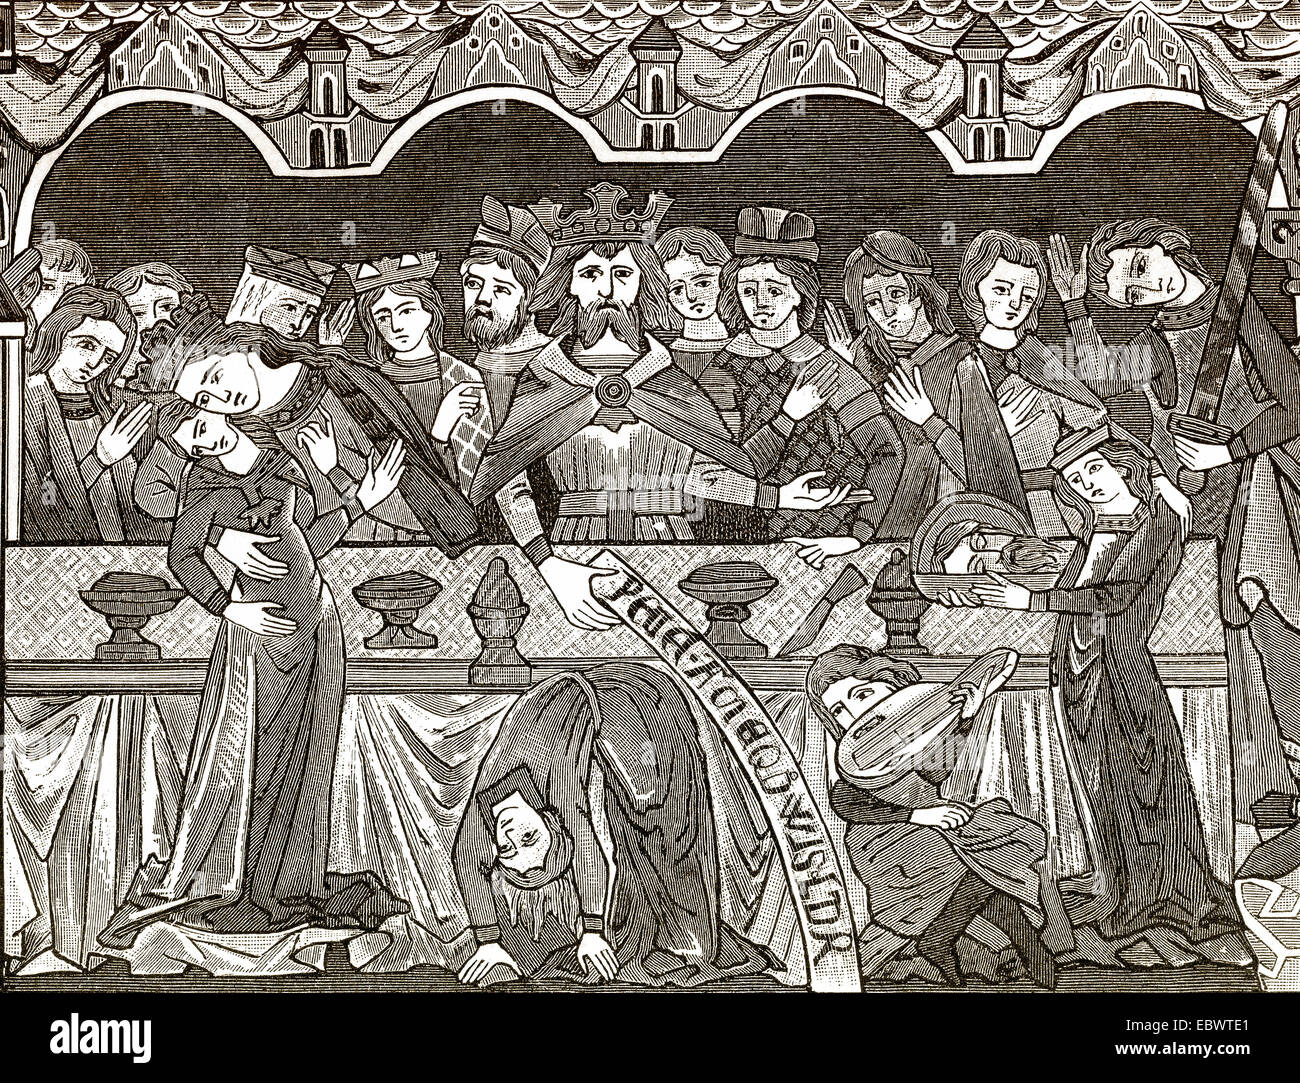 Baronial banquet table in the 12th century, Stock Photo